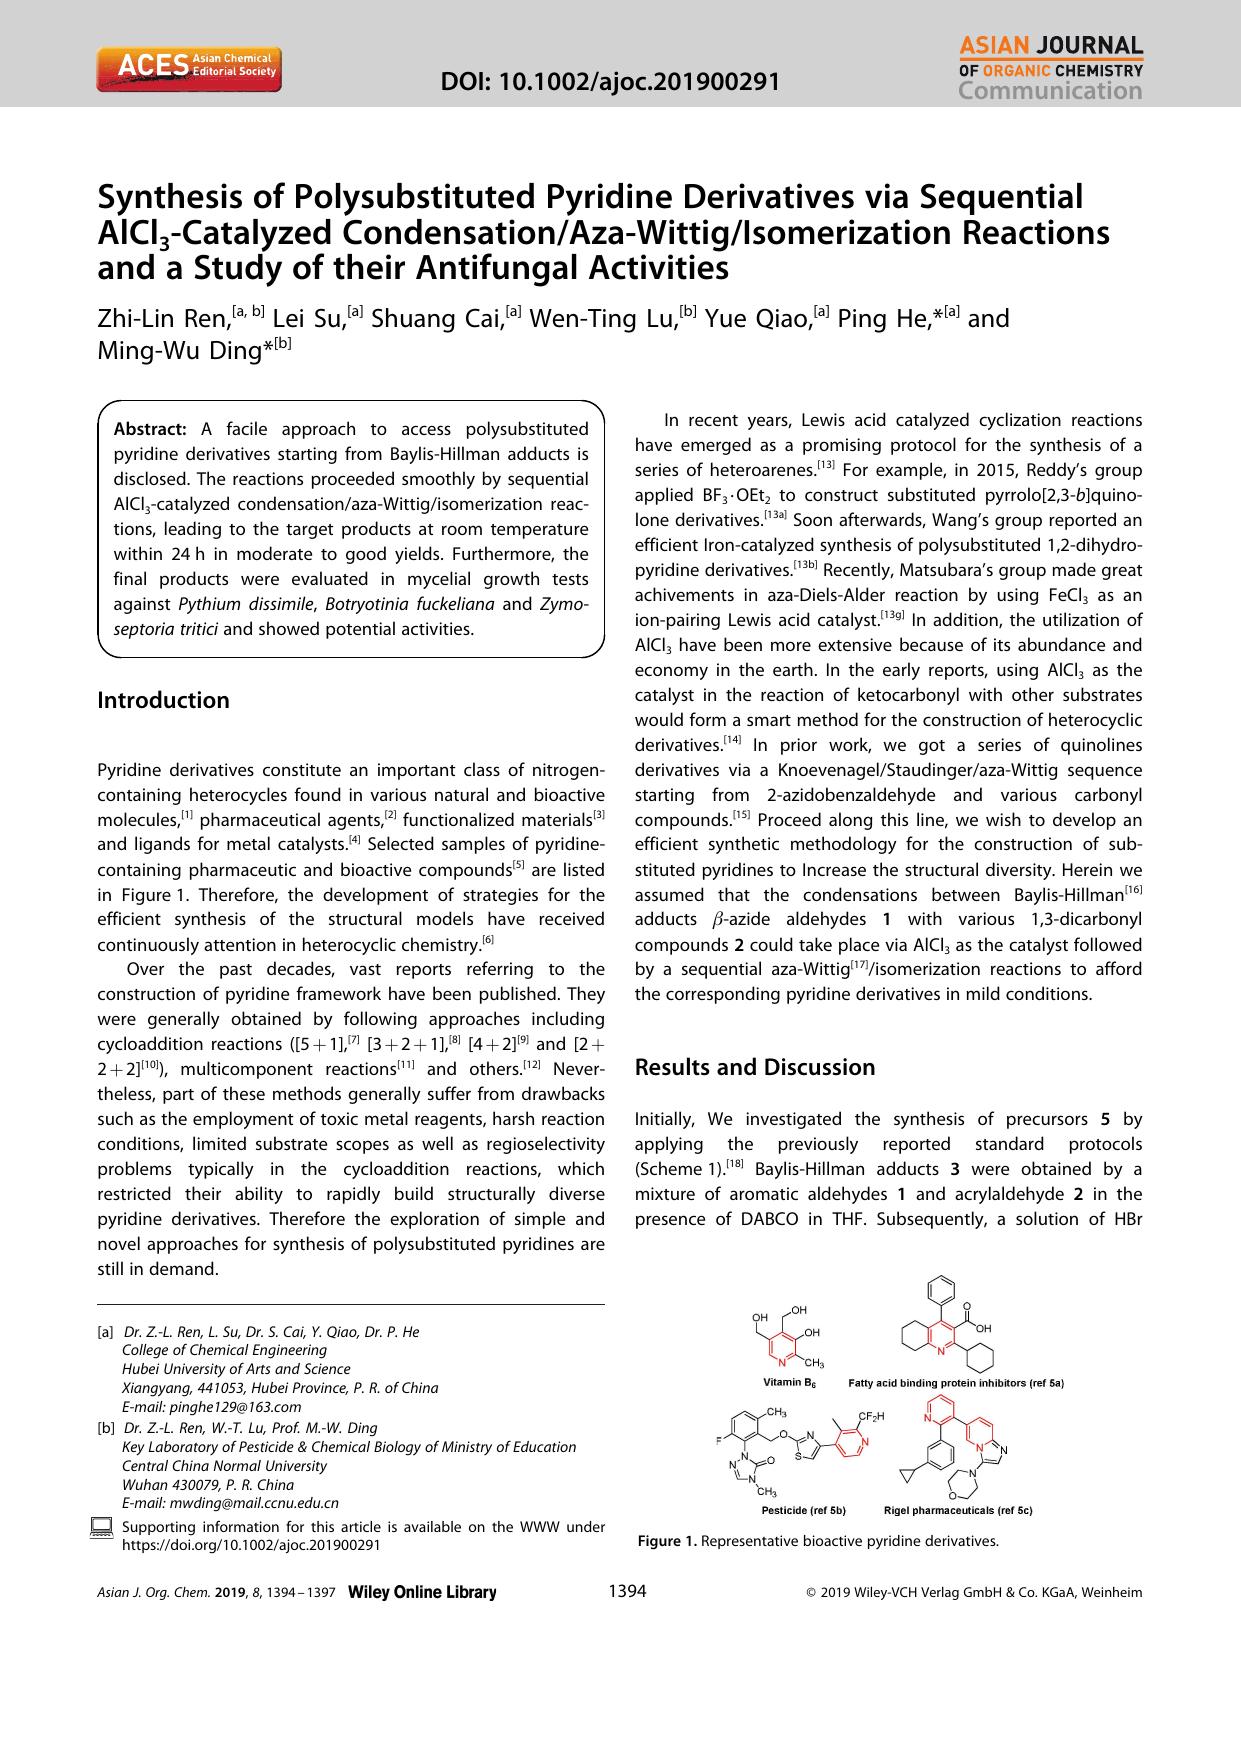 Synthesis of Polysubstituted Pyridine Derivatives via Sequential AlCl3âCatalyzed CondensationAzaâWittigIsomerization Reactions and a Study of their Antifungal Activities by Unknown